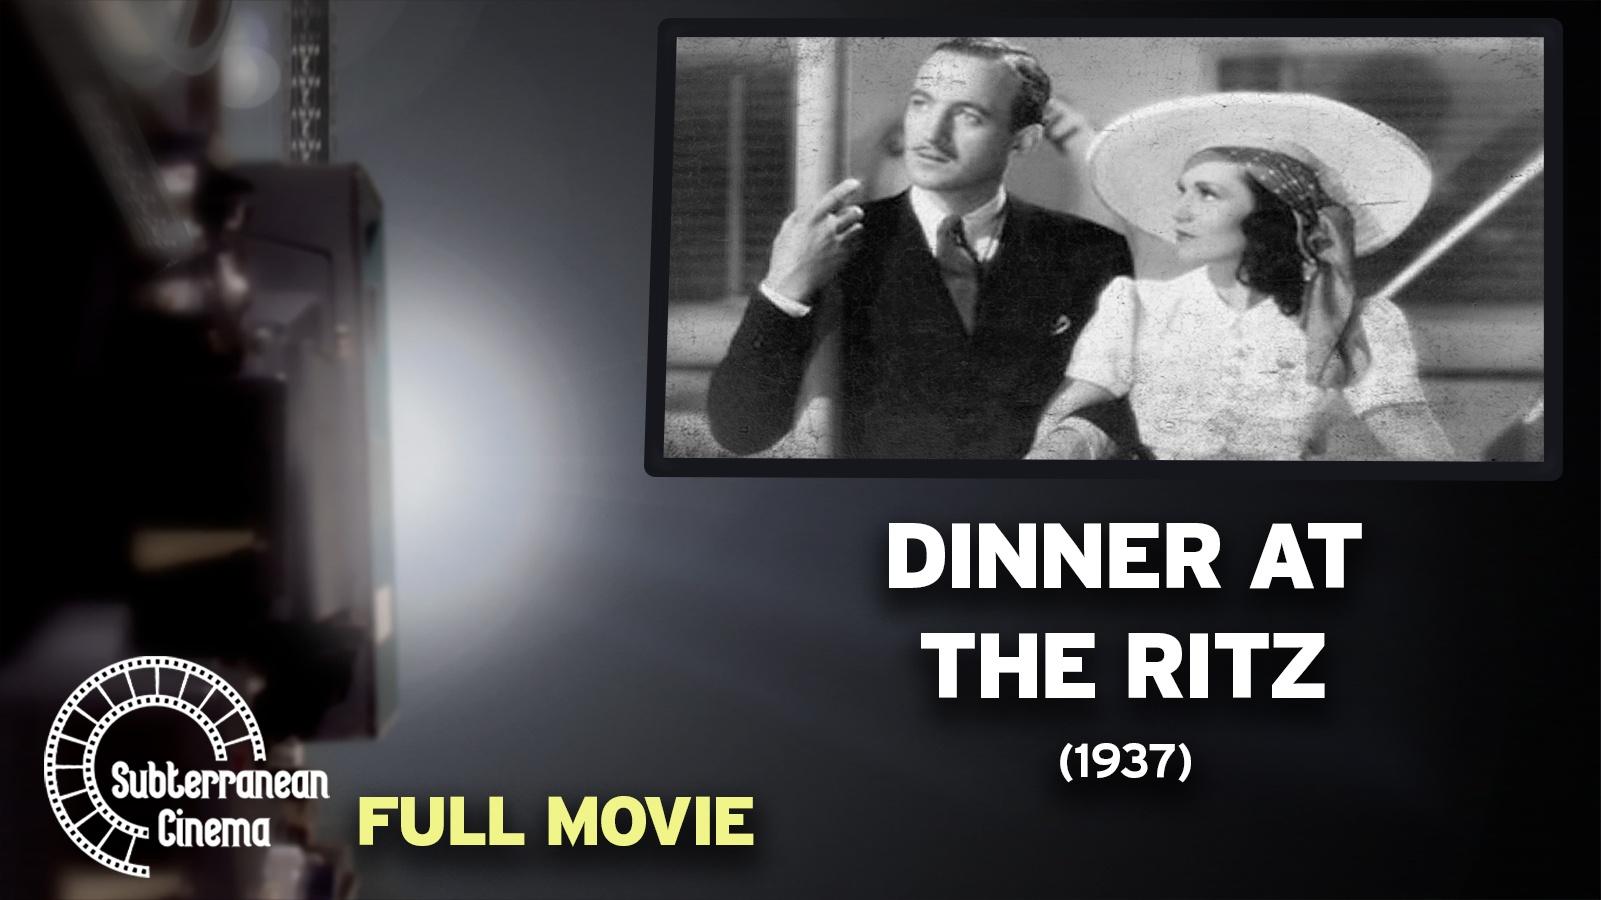 Dinner At The Ritz (1937)